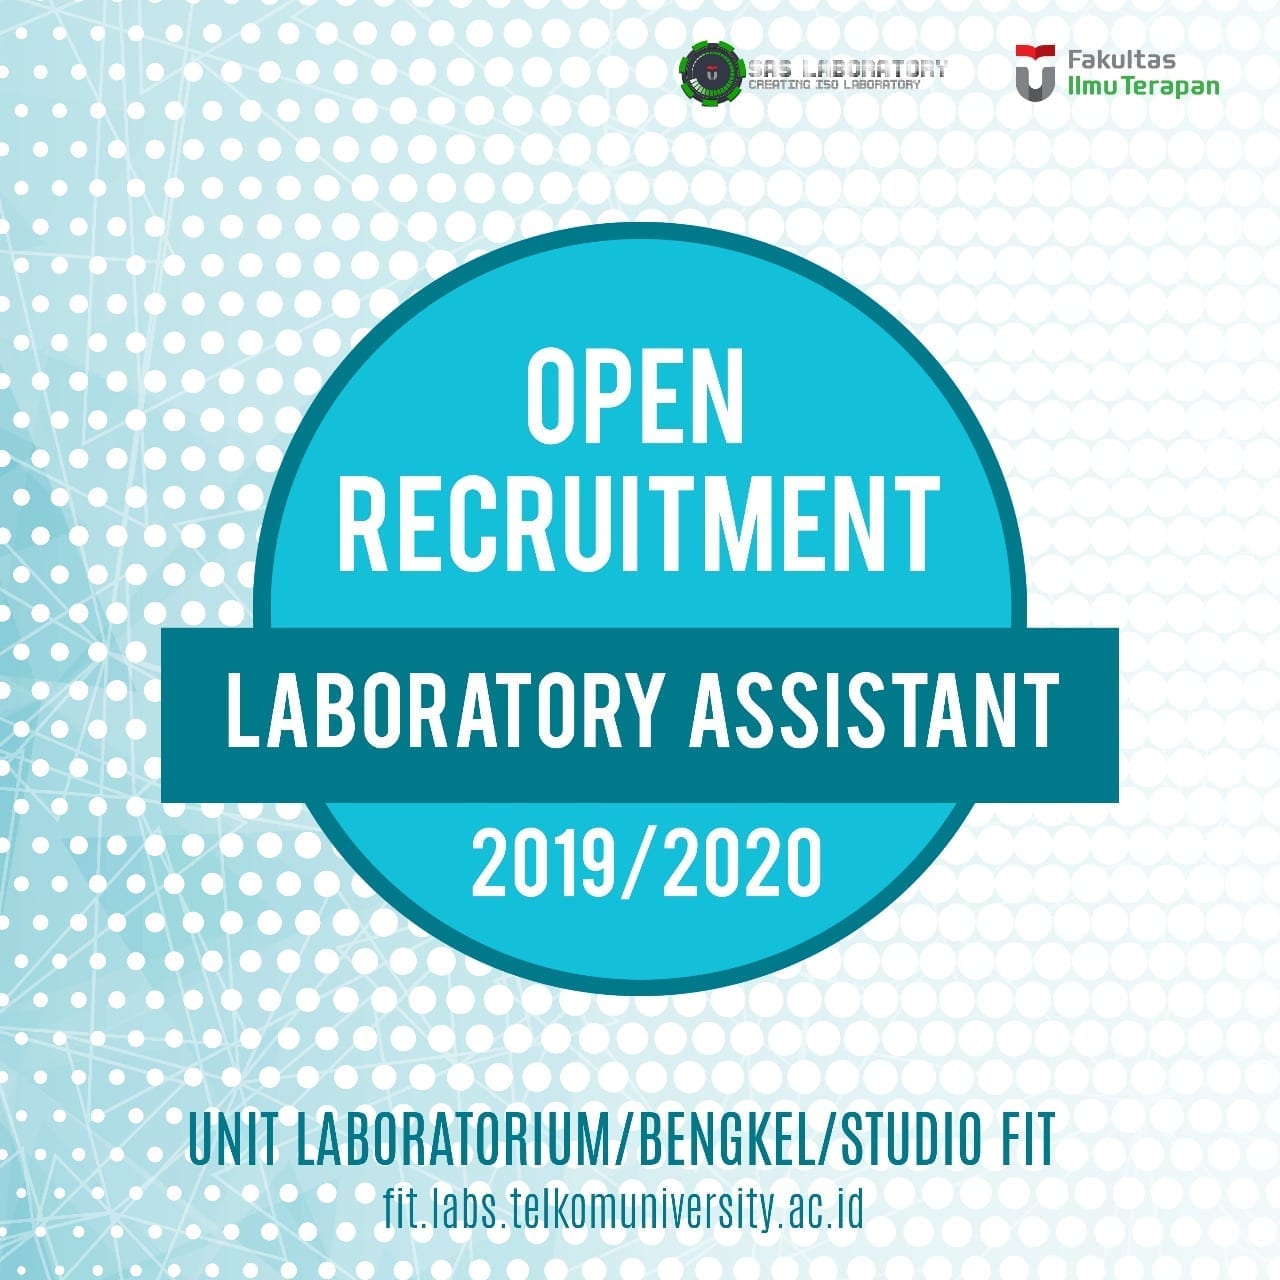 [EXTENDED] Open Recruitment Laboratory Assistant 2019/2020 FIT Telkom University